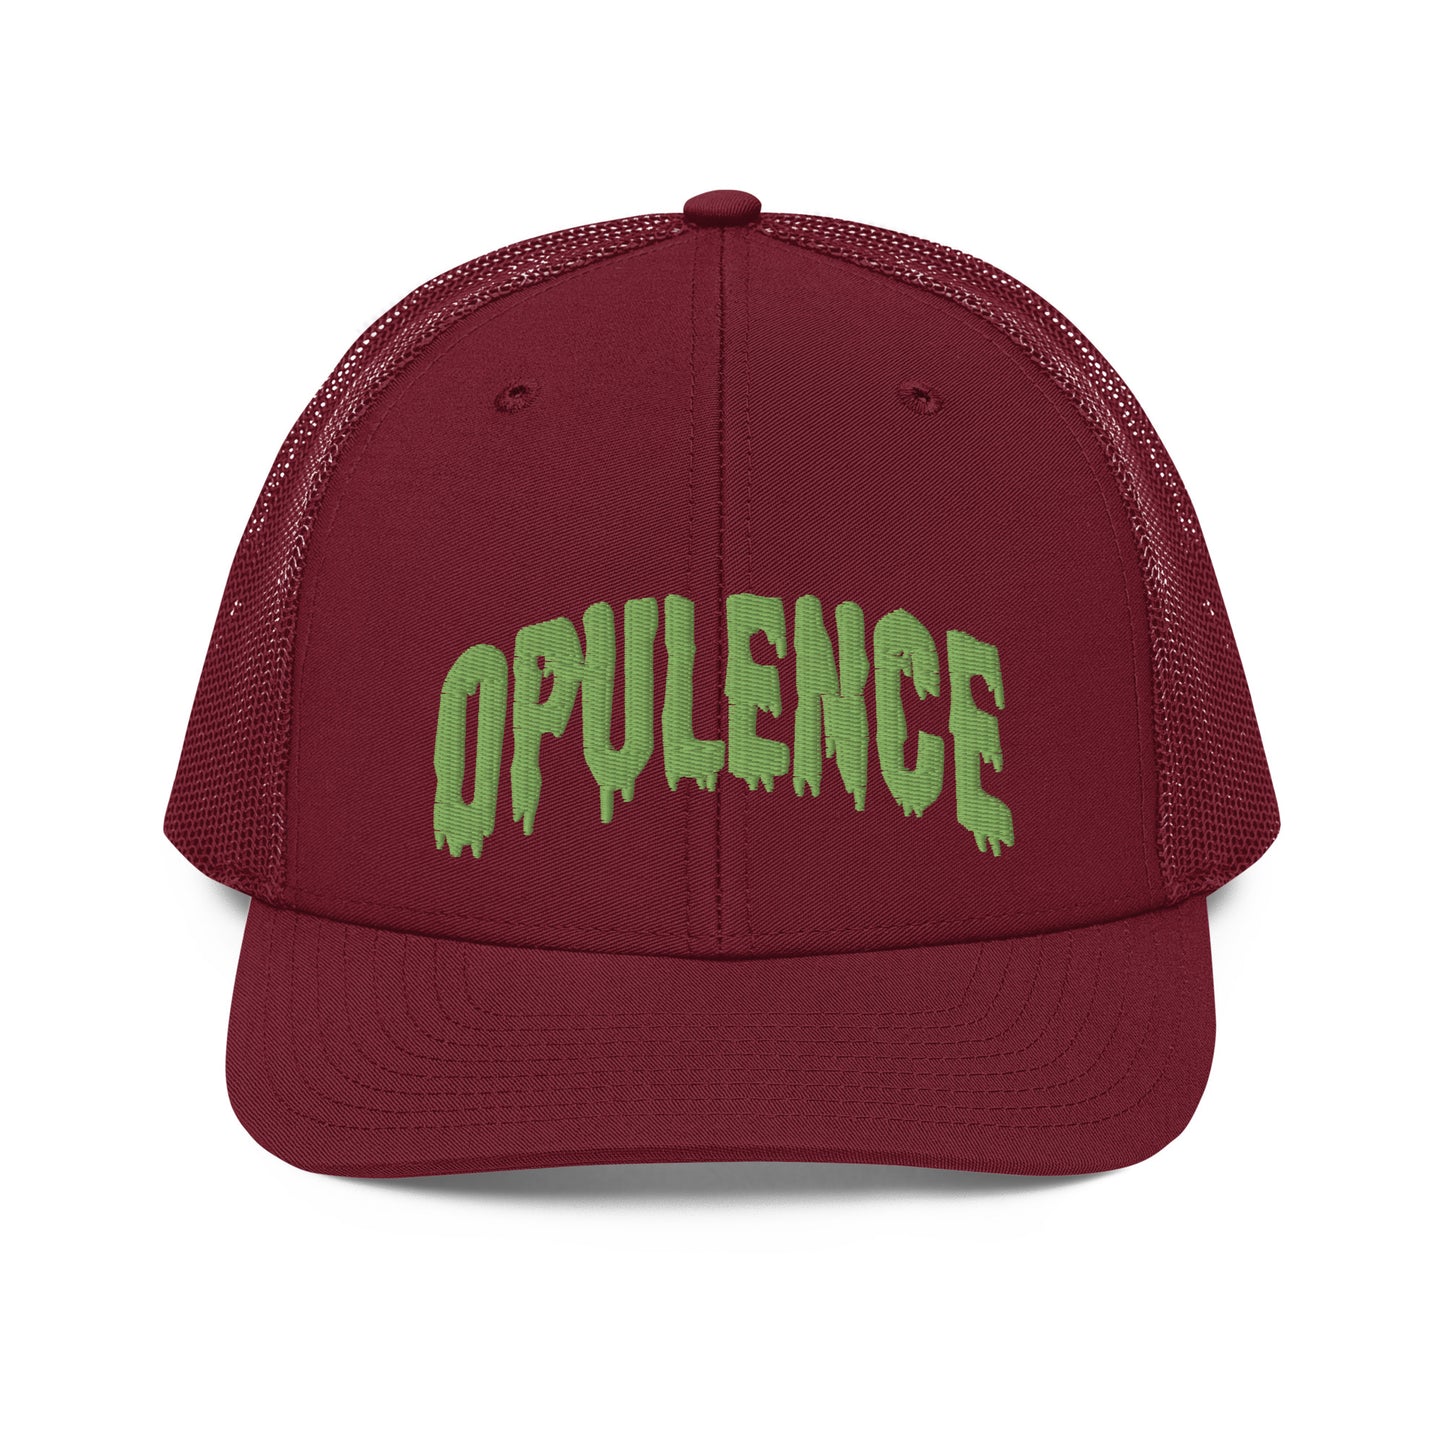 Opulence Trucker hat embroidered